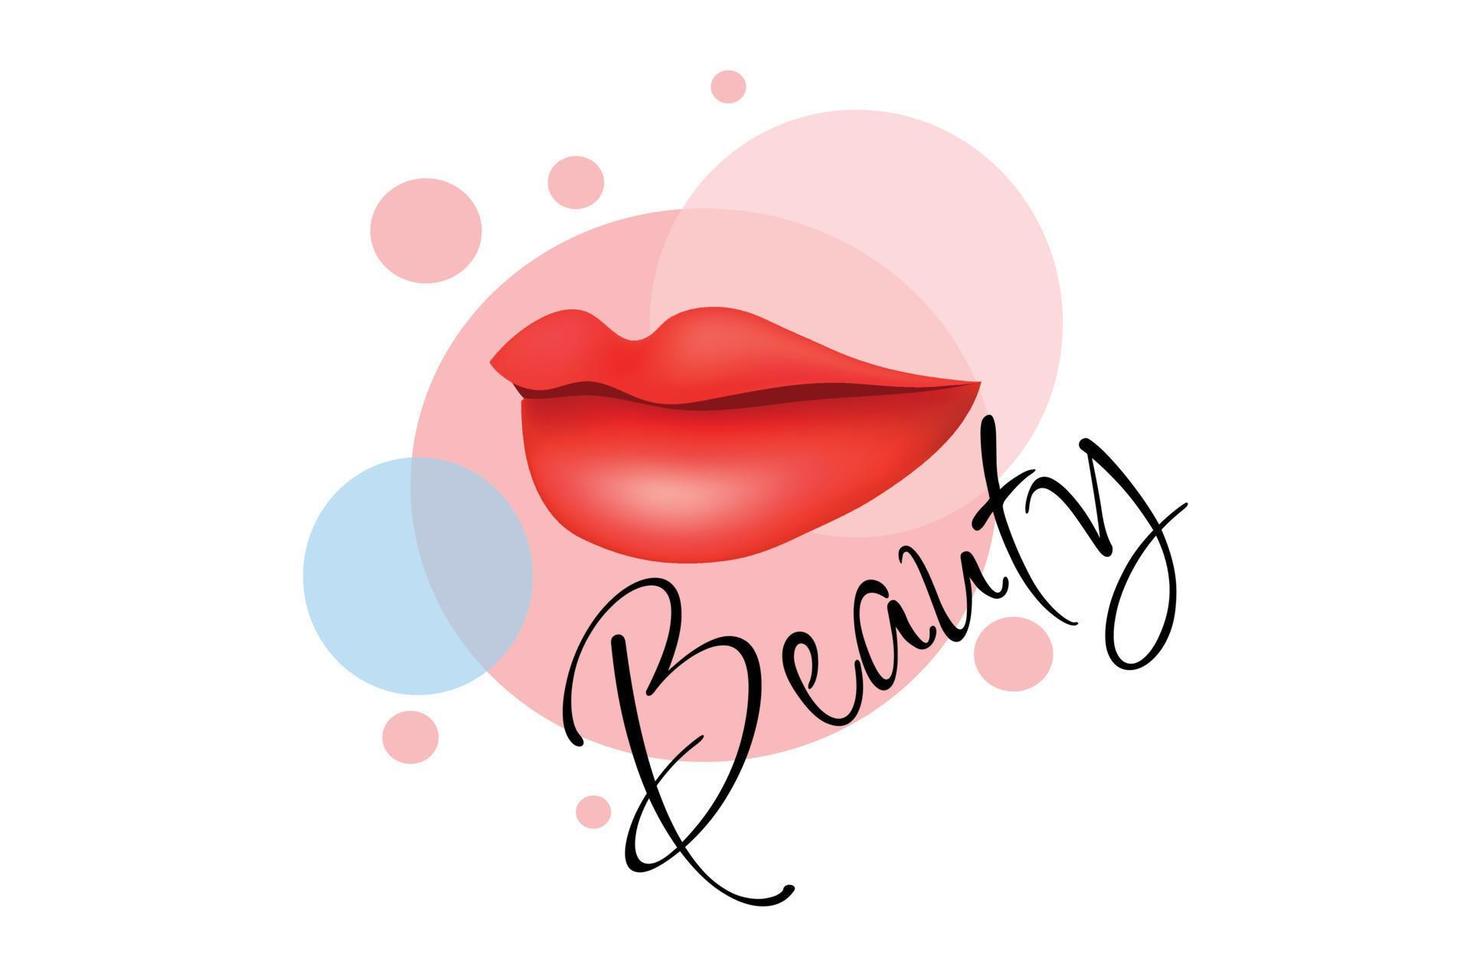 Beauty Lips kiss makeup cosmetics salon spa logo design template for brand or company and other vector